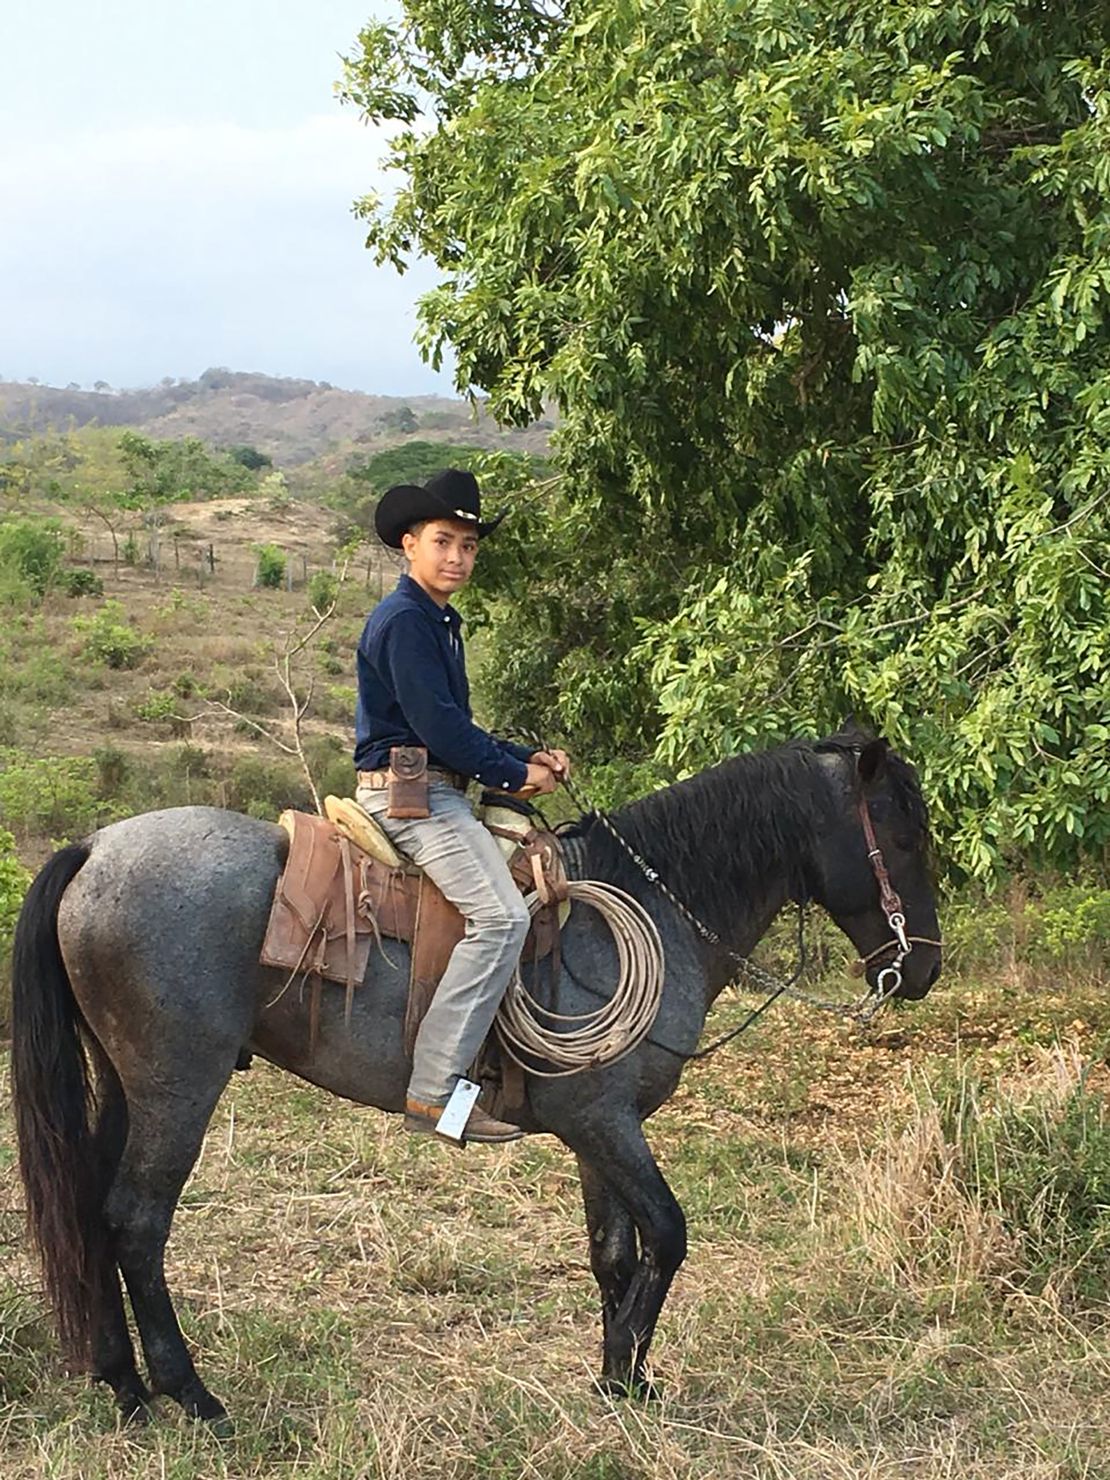 Alex loved riding horses and participating in activities around his grandparents' farm in Mexico, his dad said.